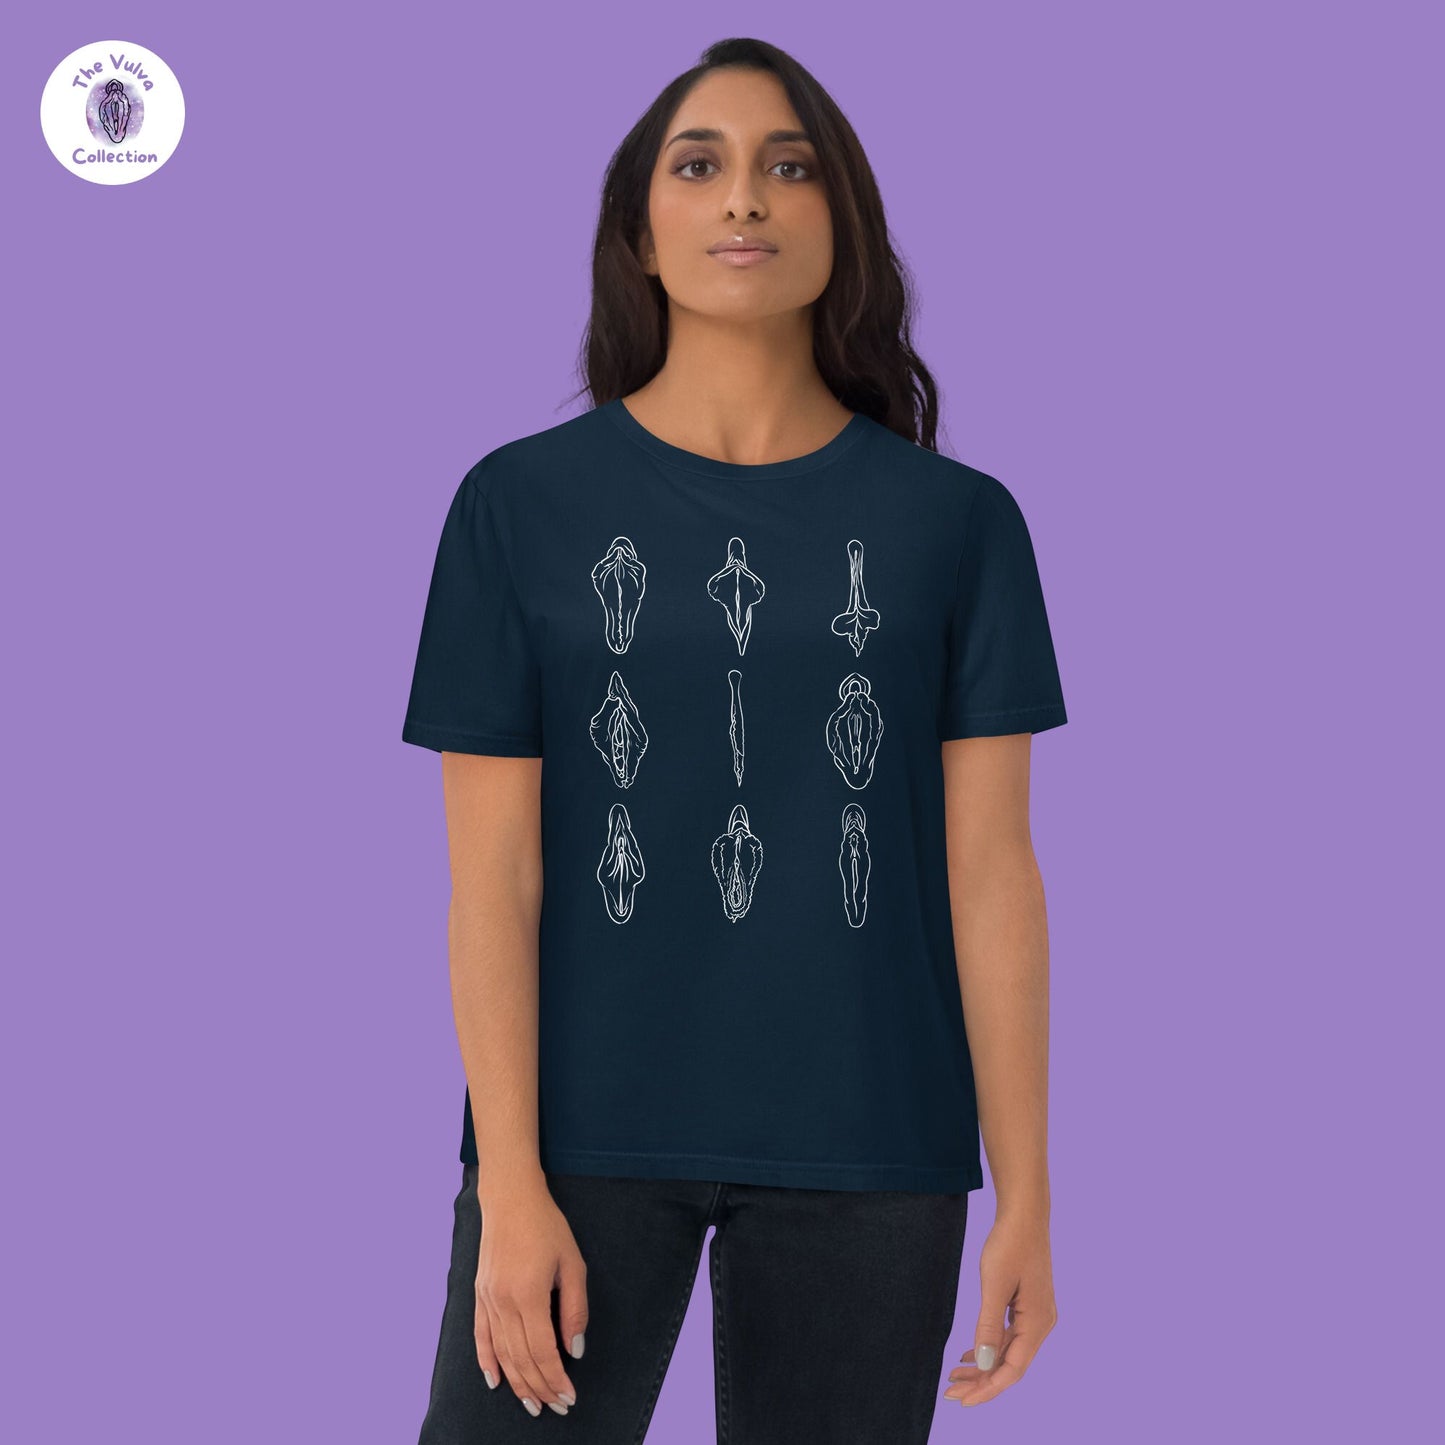 My Friends and I Unisex Fit Organic T-Shirt